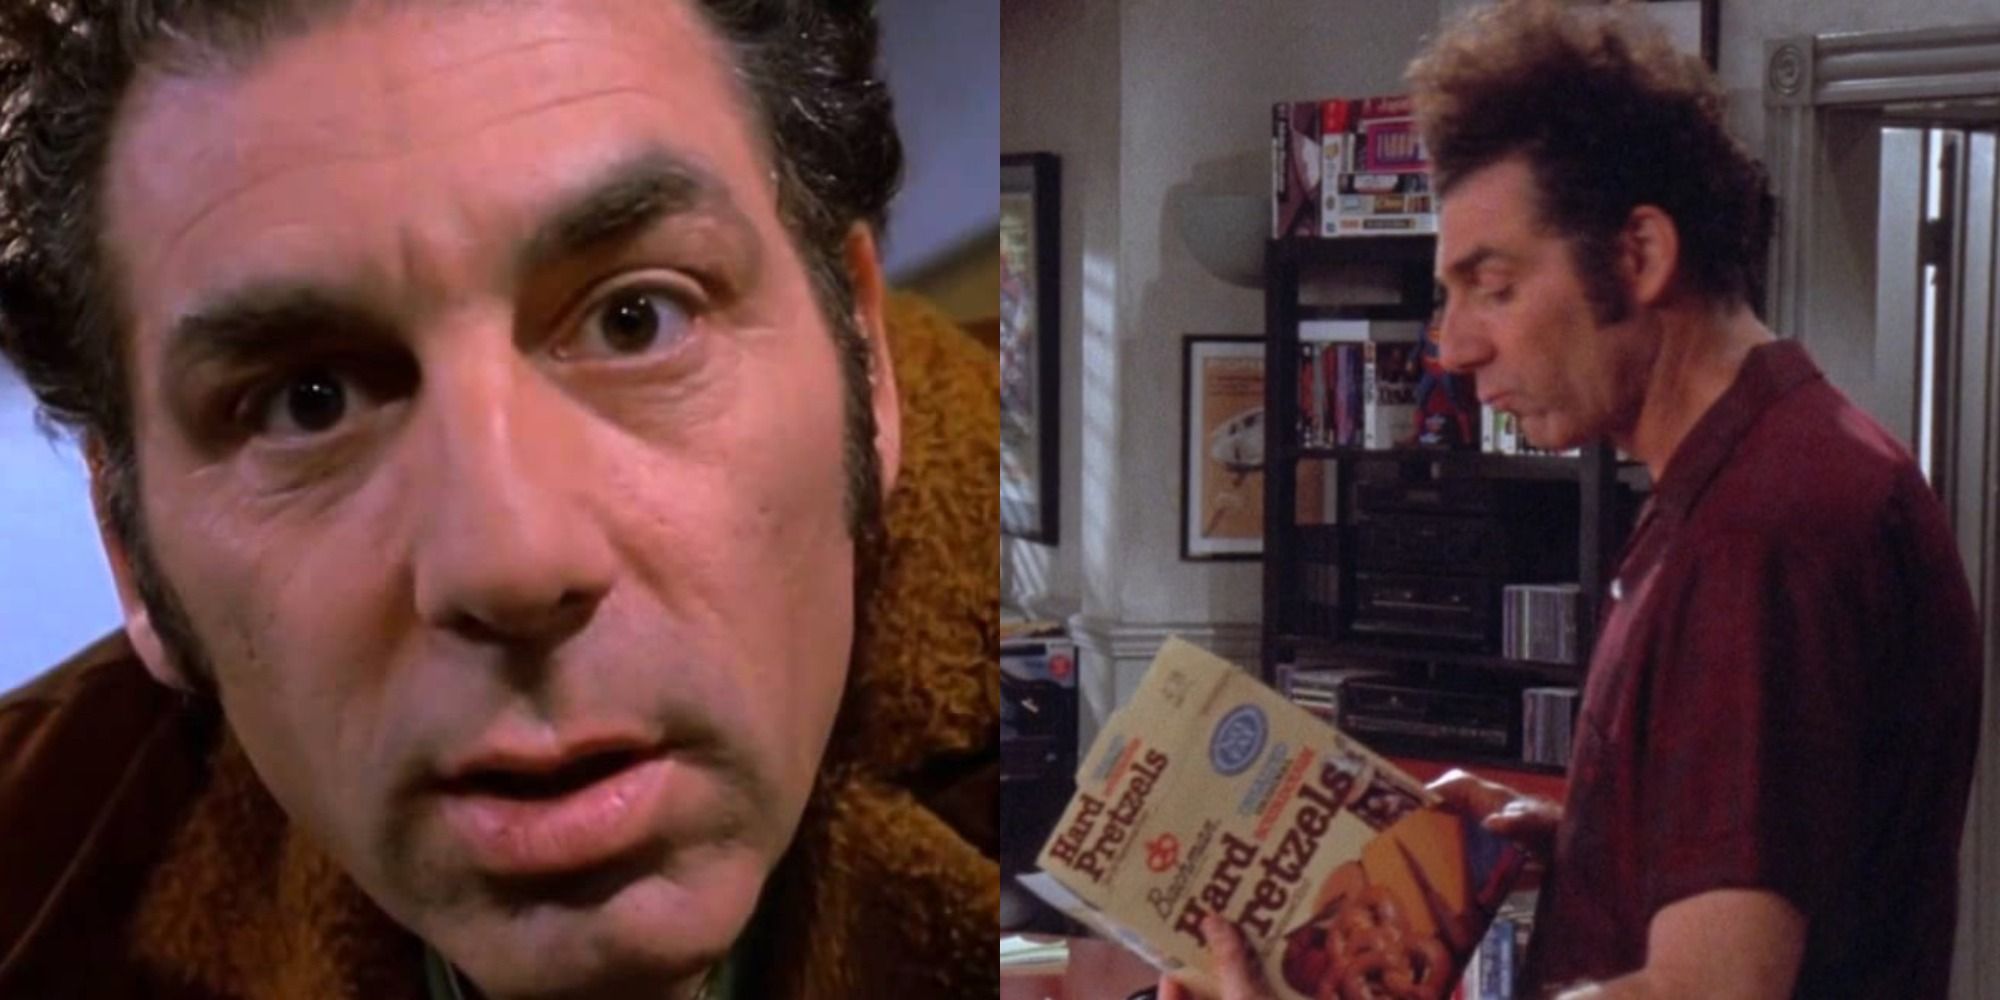 Two images of Cosmo Kramer from Seinfeld